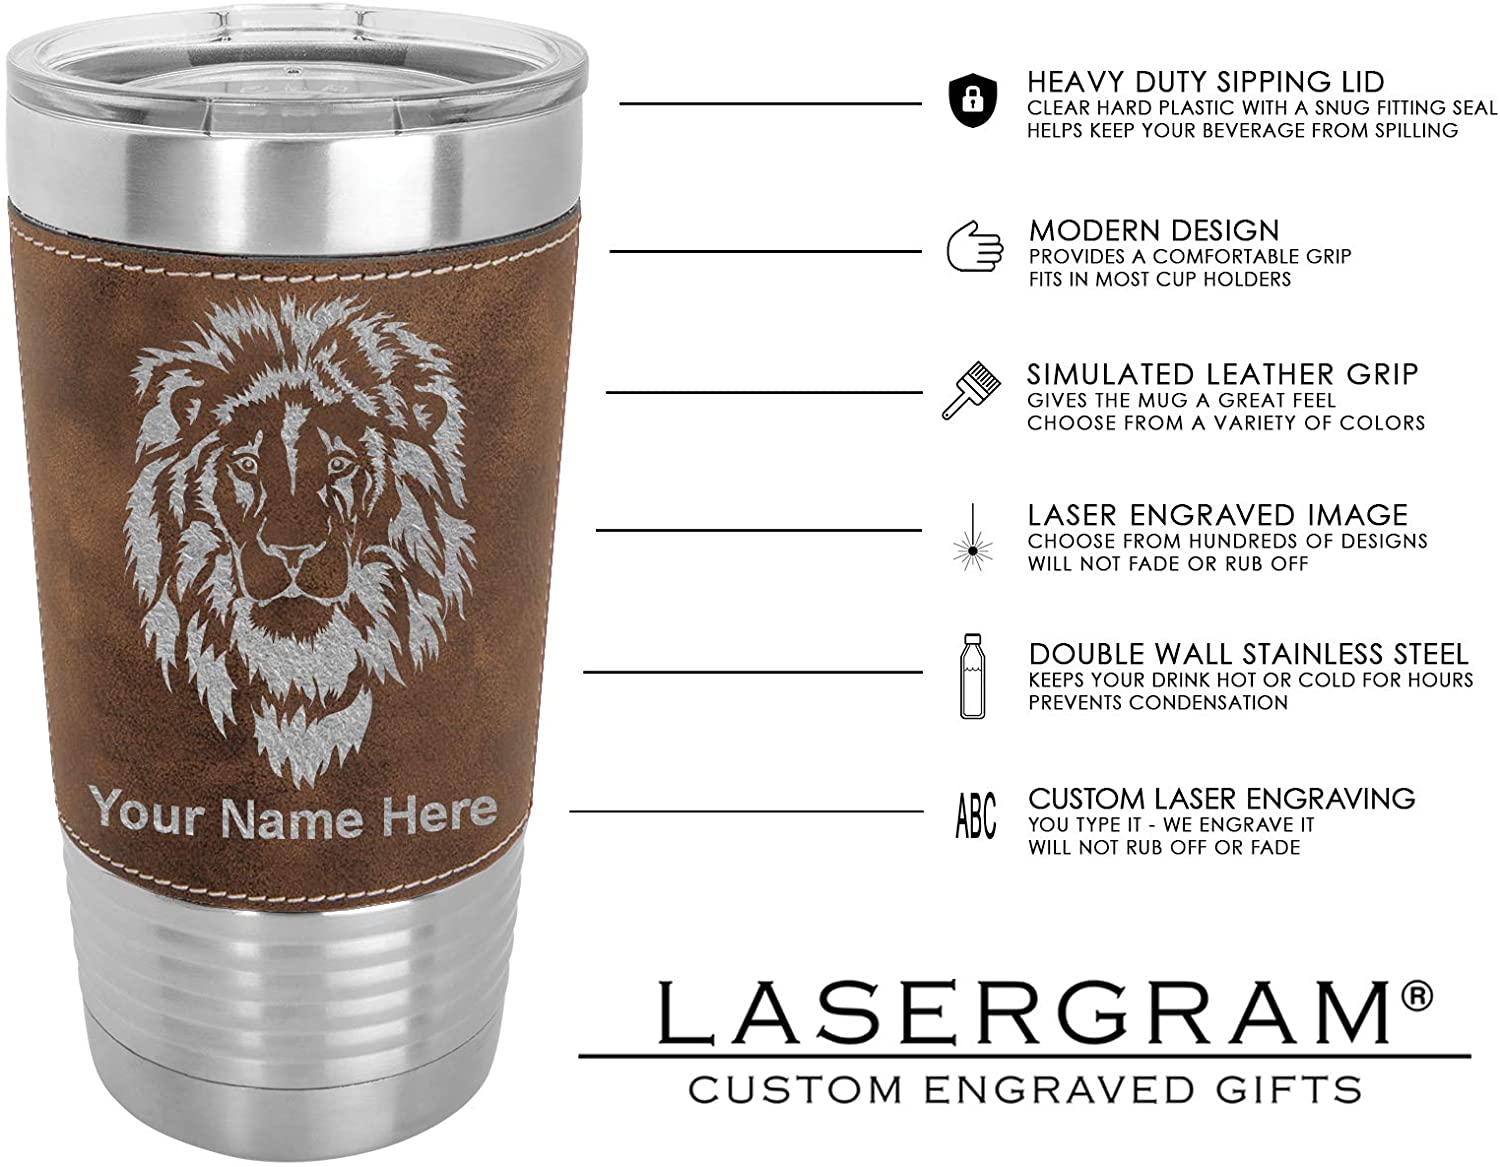 20oz Faux Leather Tumbler Mug, Accounting, Personalized Engraving Included - LaserGram Custom Engraved Gifts